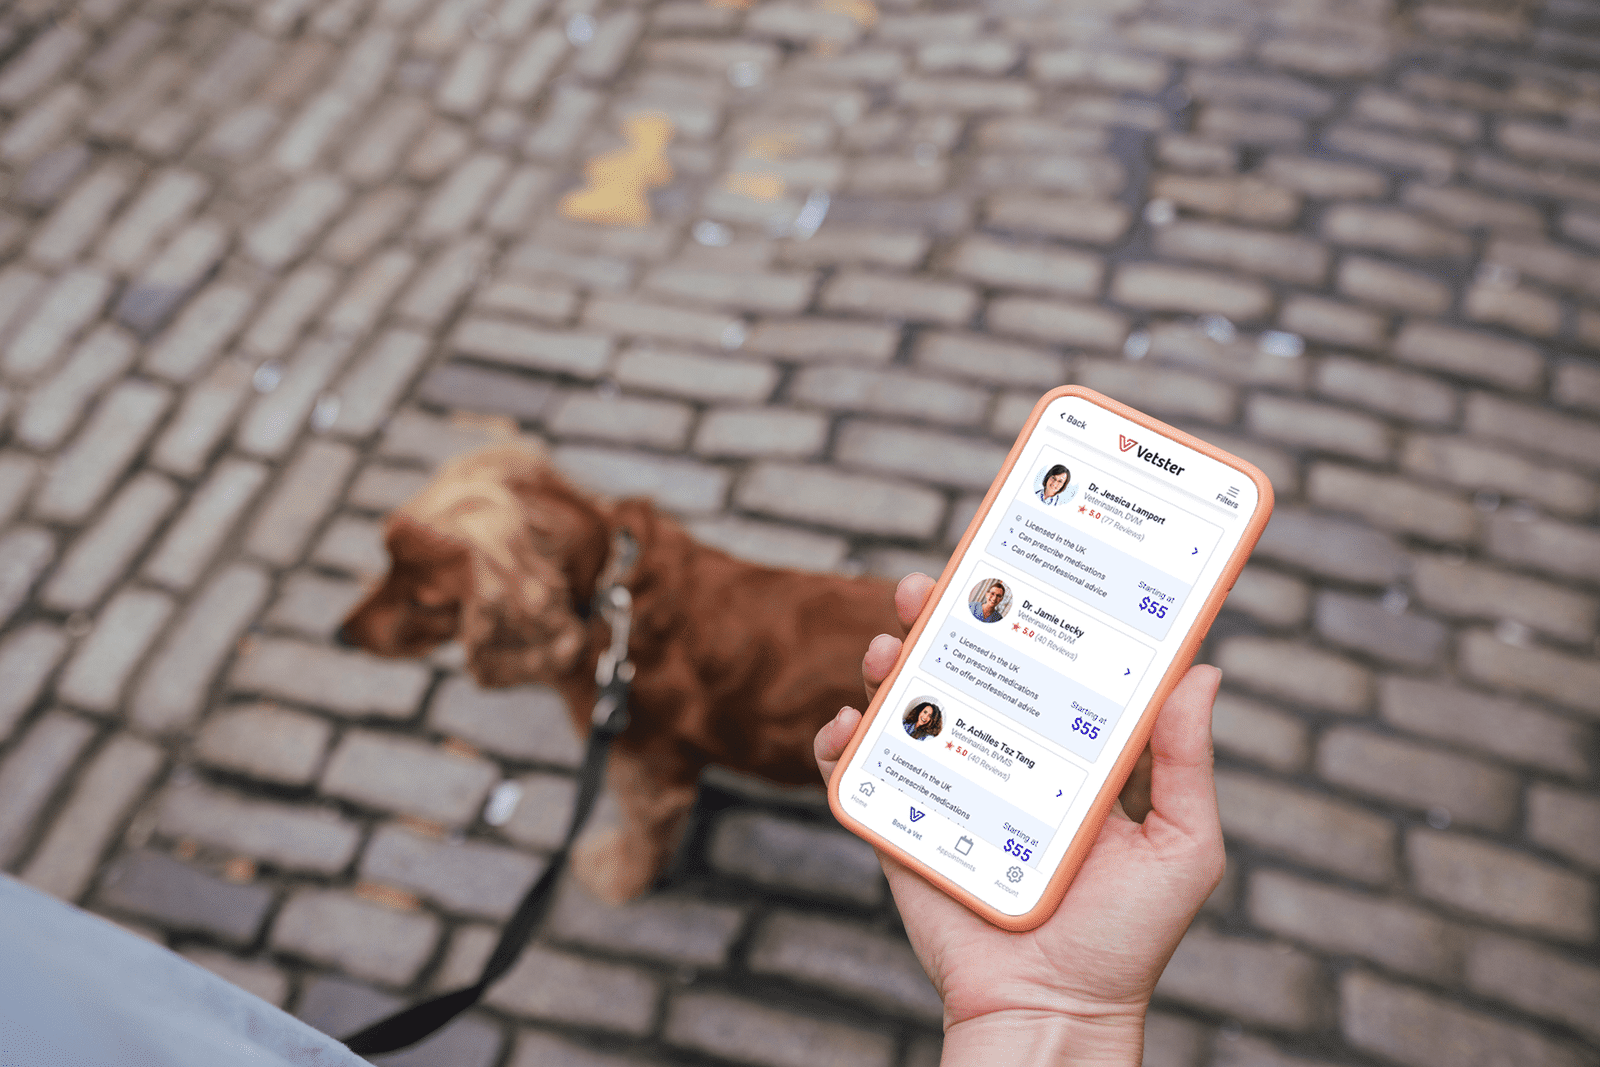 Virtual care: telehealth, telemedicine, teletriage and general advice - Pet owner looks down at their phone while walking their Cocker Spaniel outdoors.